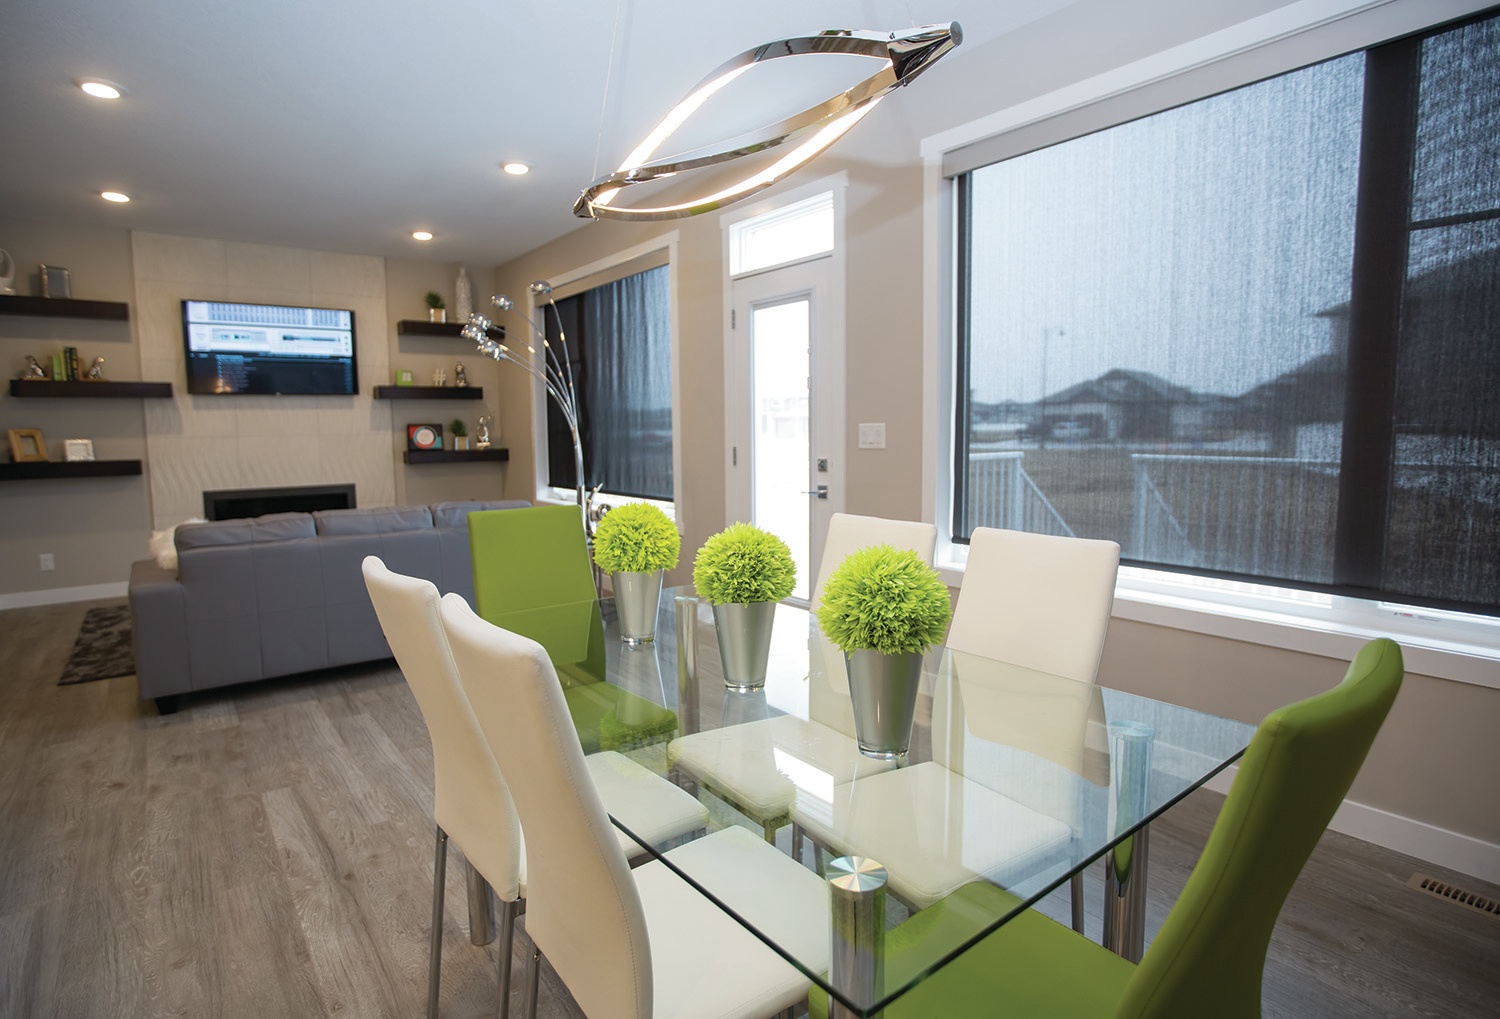 INVITING - This dining area in an Asset Builders show home in Laredo shows how decor can be used to blend two rooms together into a coherent space.